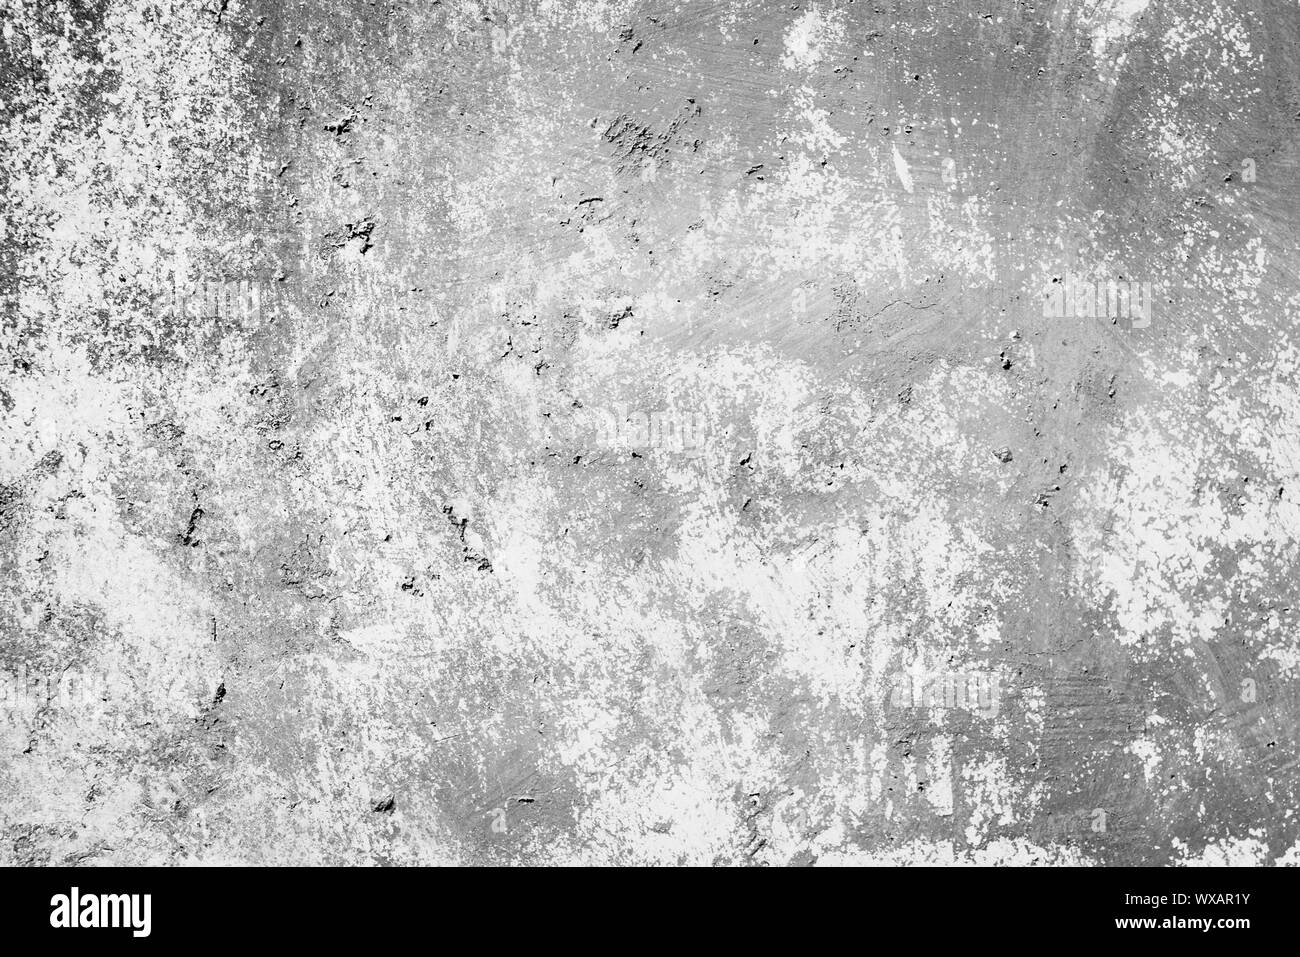 Dirt texture Black and White Stock Photos & Images - Alamy